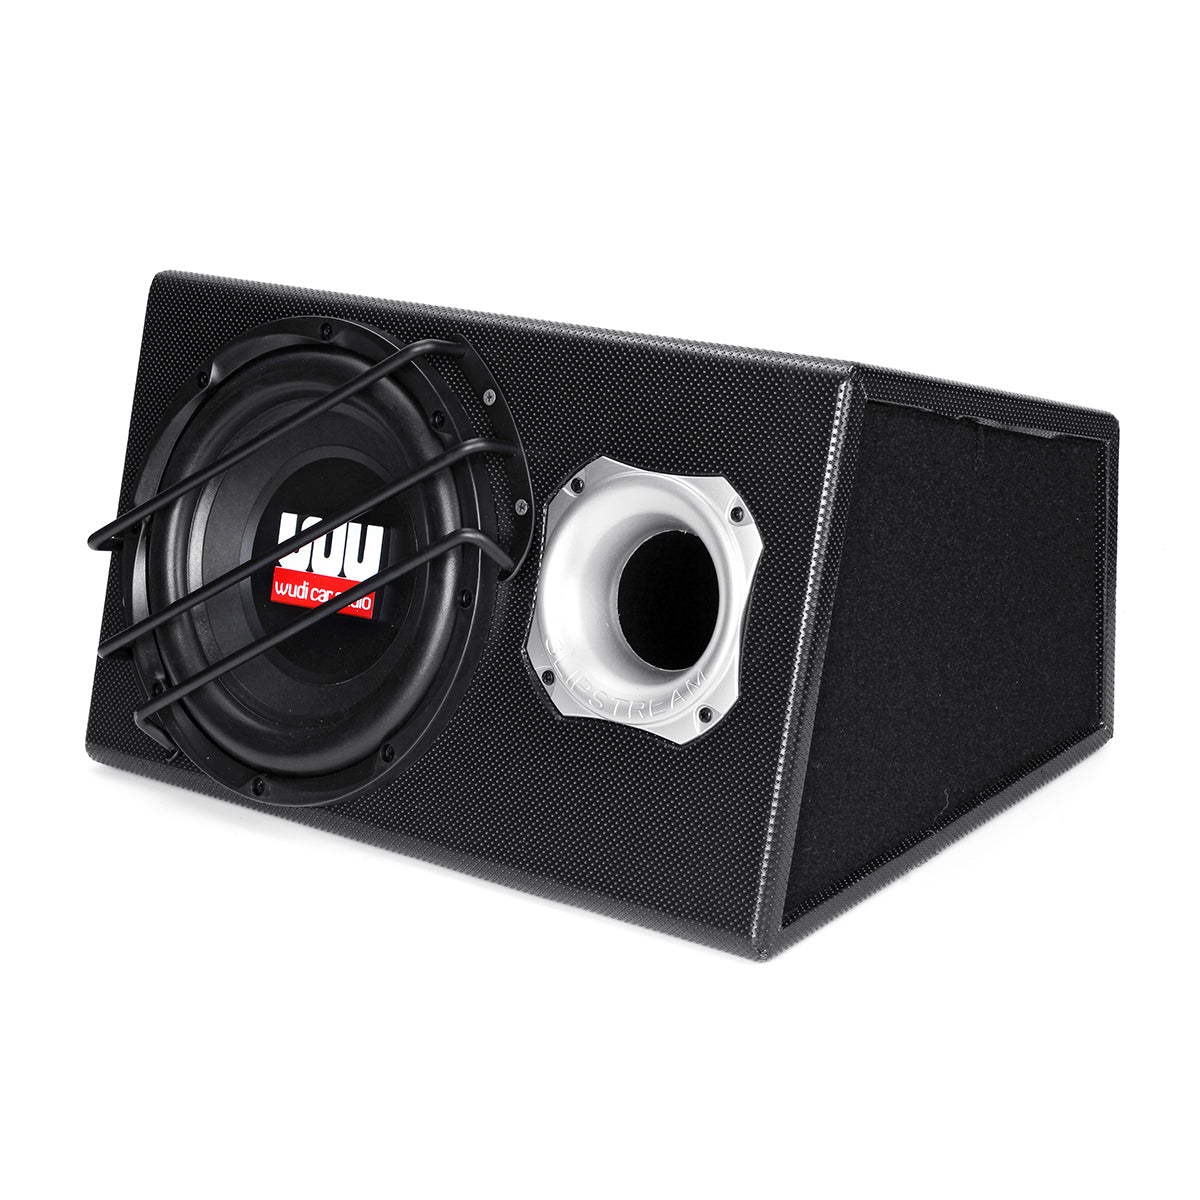 Black W10 Car Active Audio Stereo Subwoofer Powered Amplifier Enclosure Speaker With Wire 1100W 12V